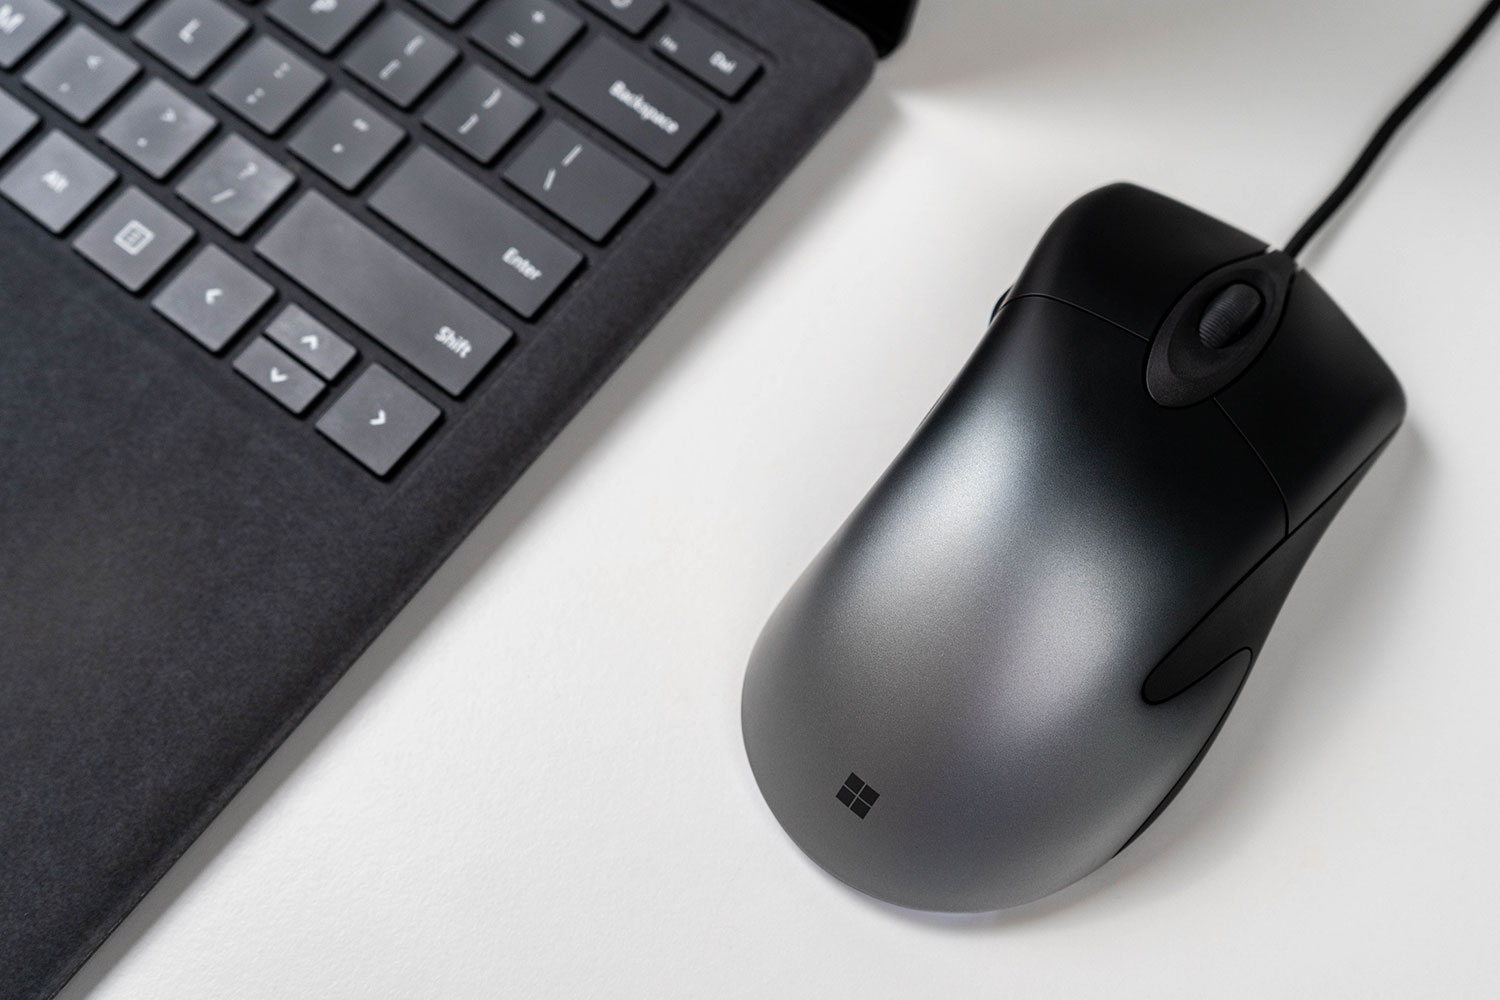 Microsoft Pro IntelliMouse Review: Retro Design, For Better or